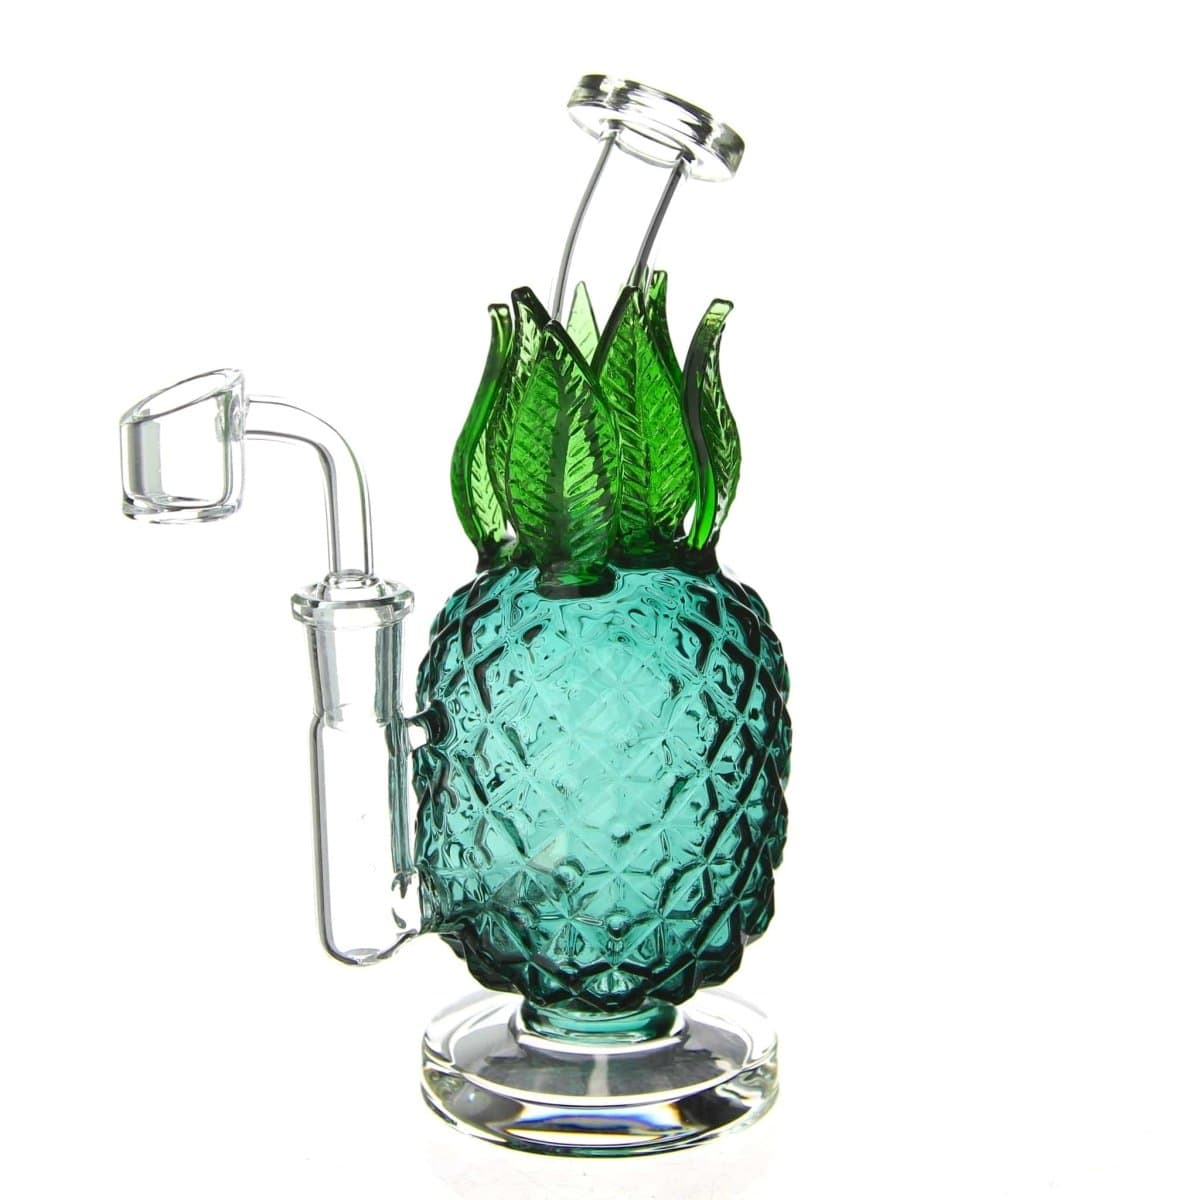 Benext Generation Dab Rig Teal Exotic Pineapple Dab Rig